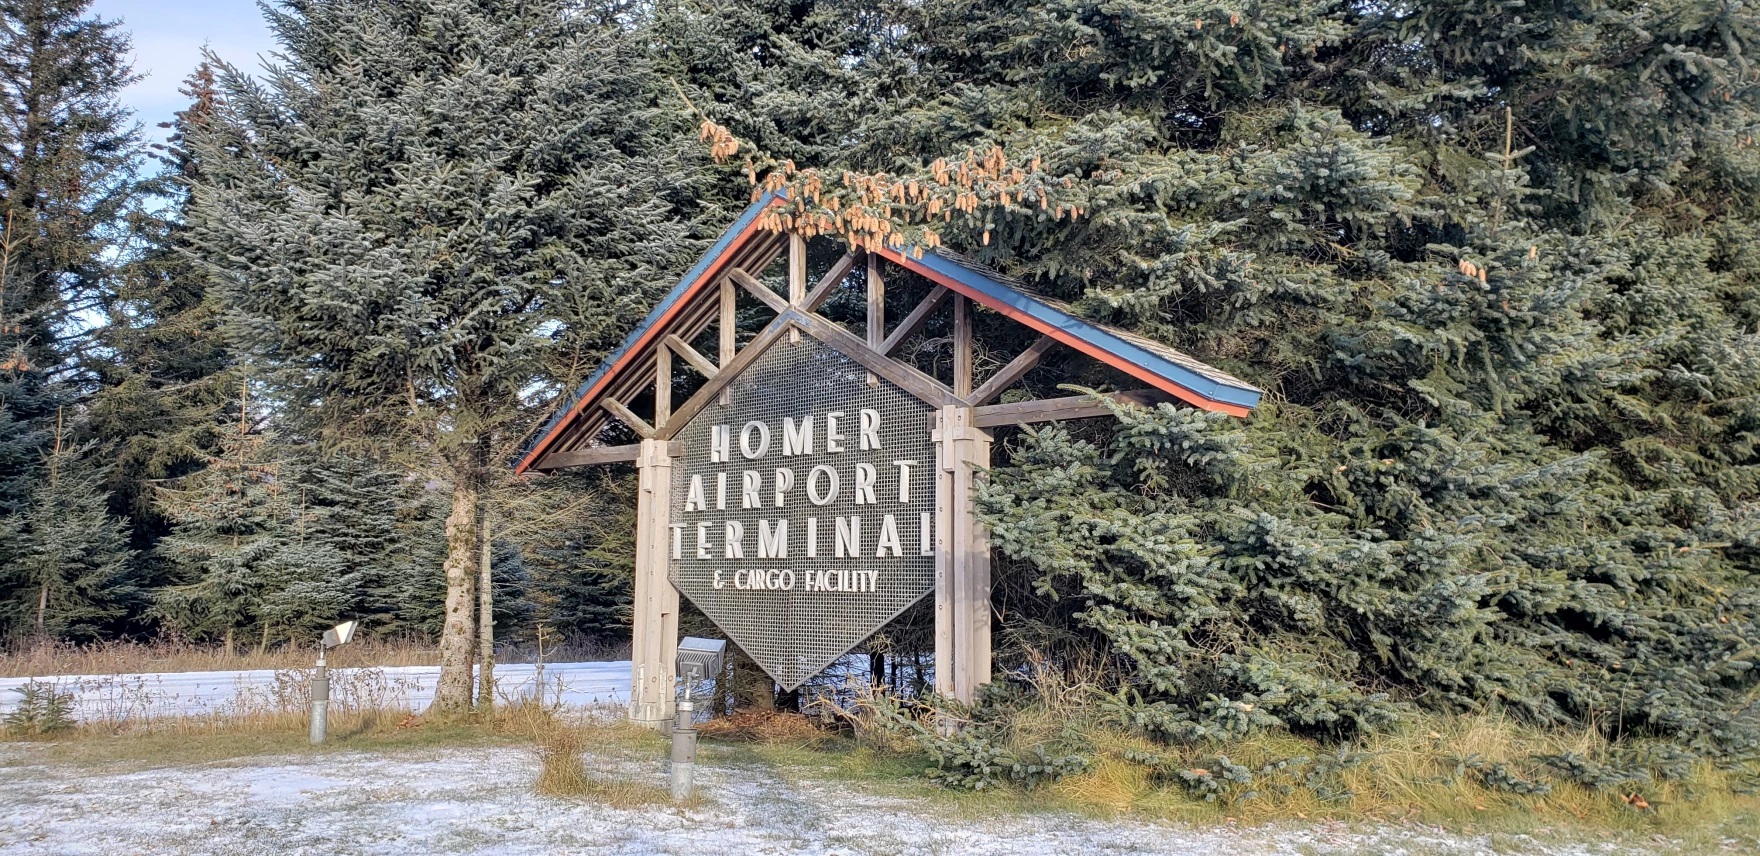 the Homer Airport